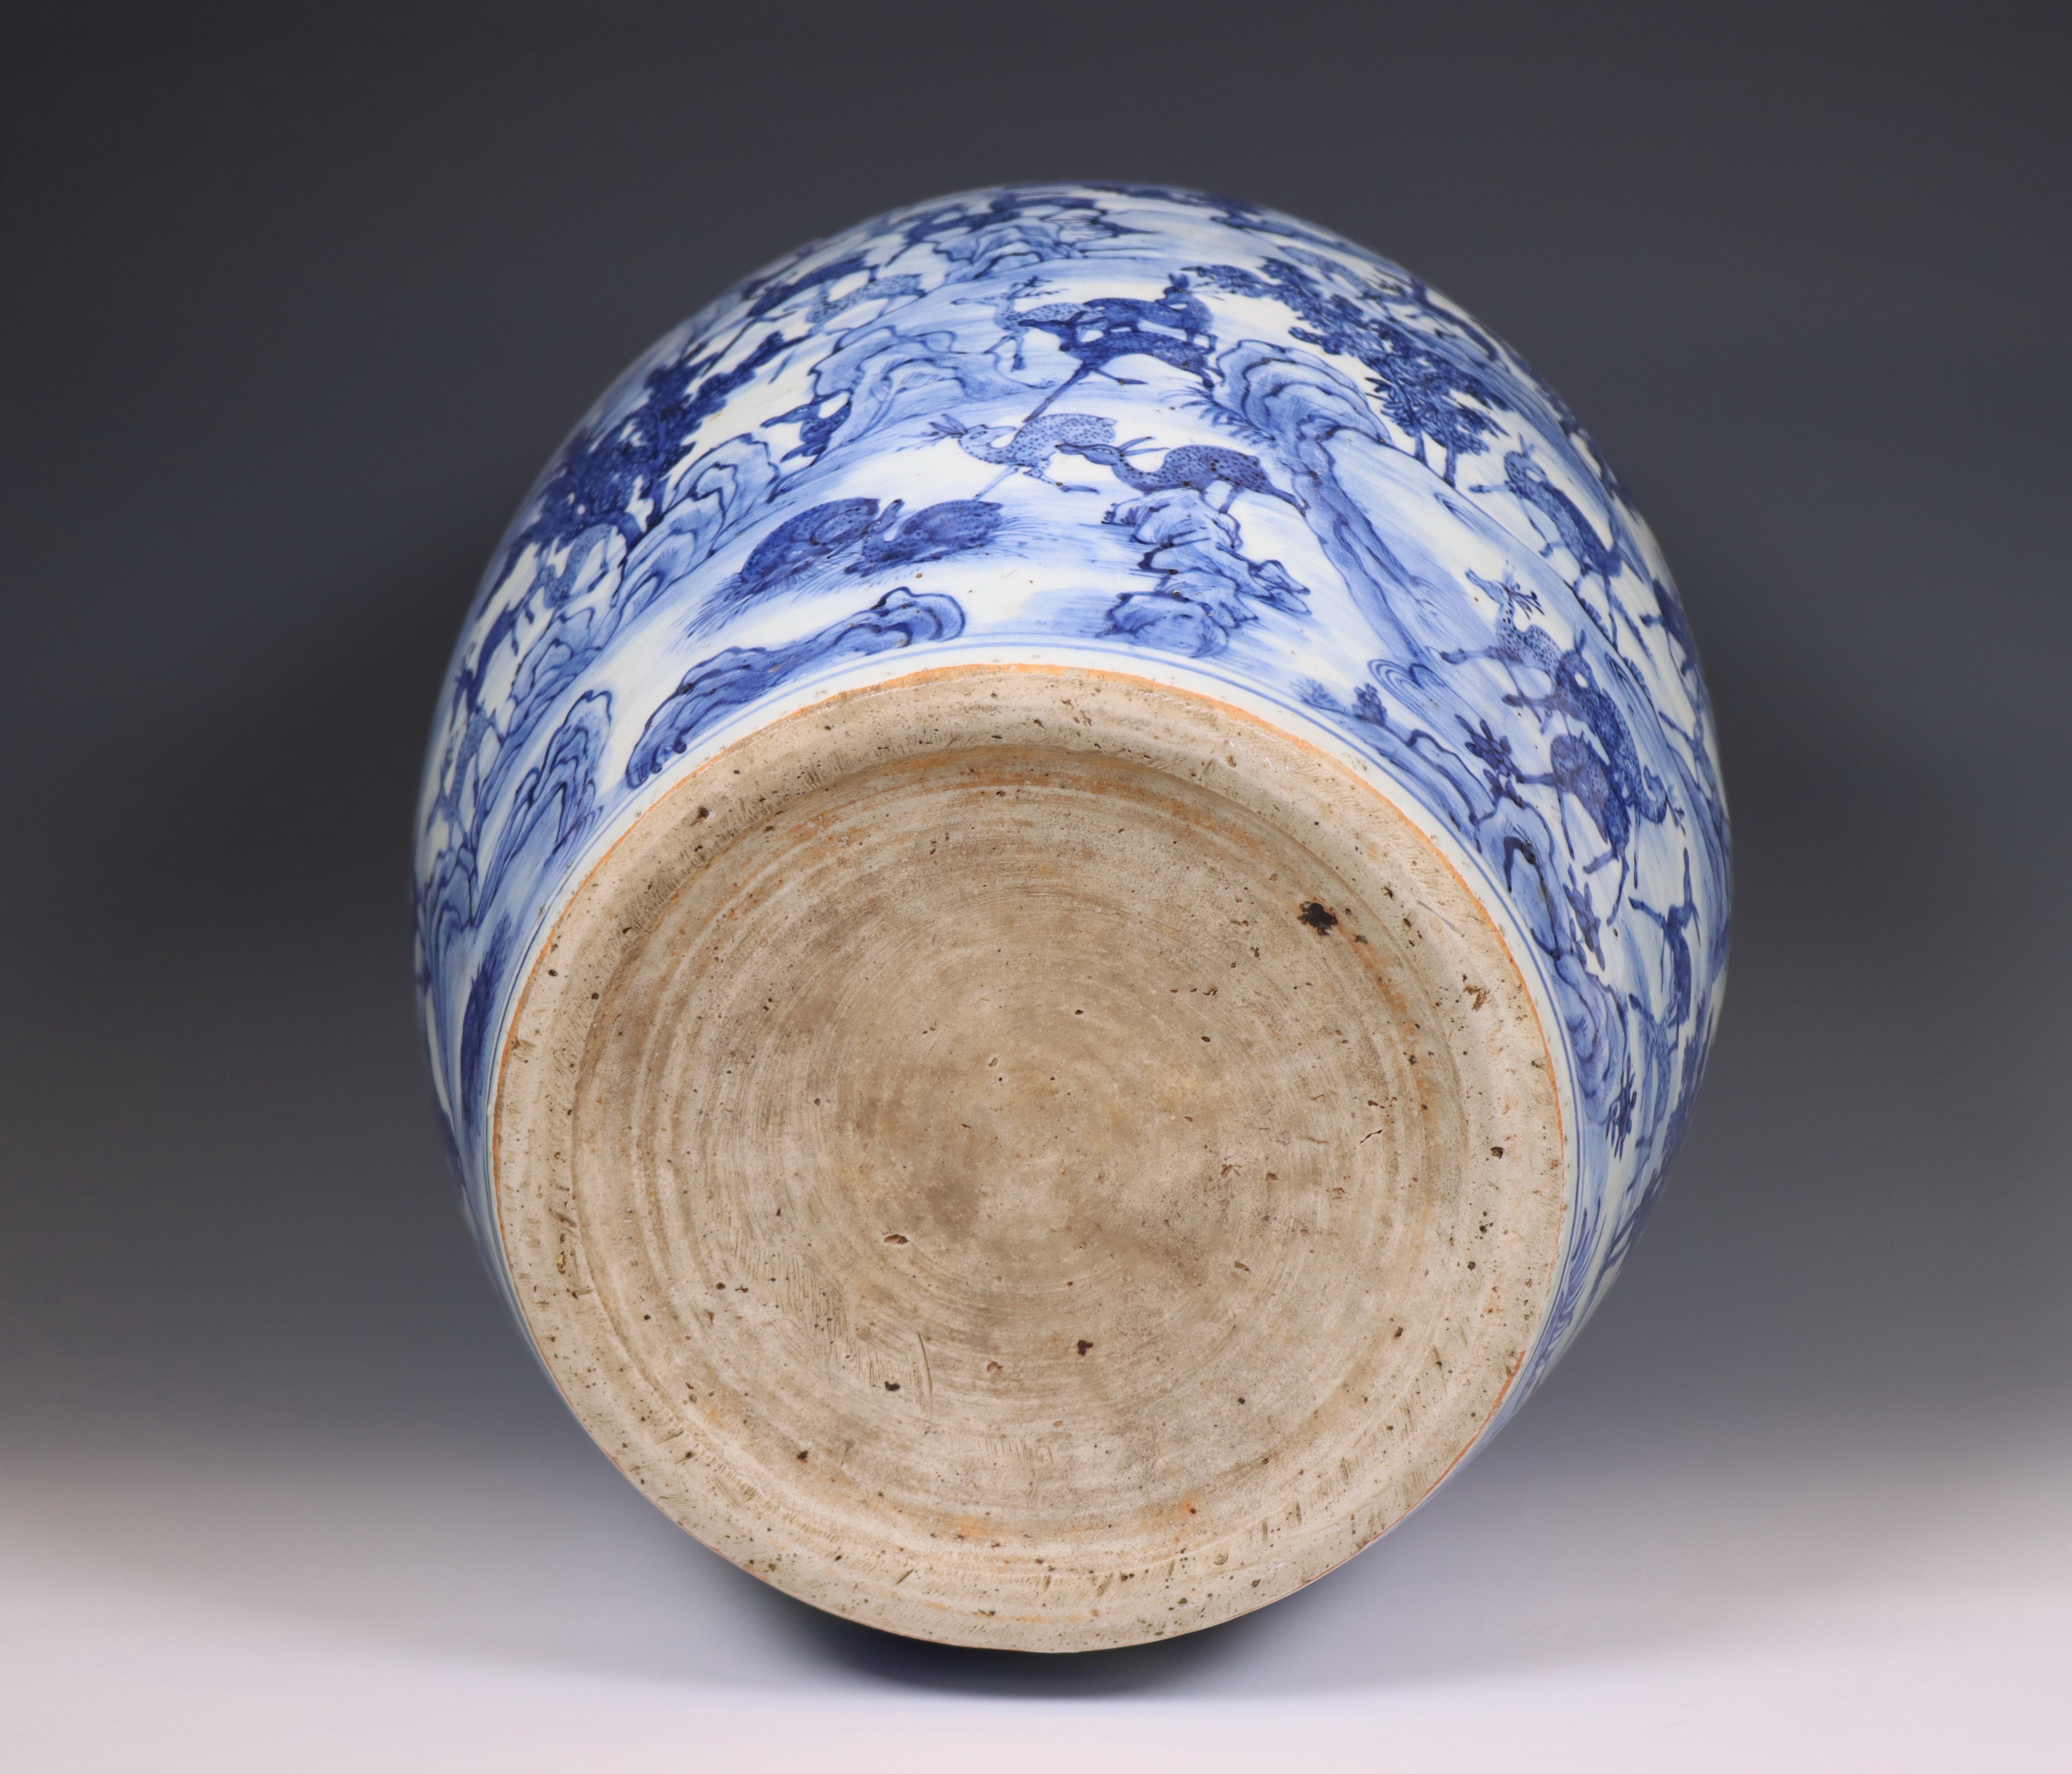 China, blue and white porcelain 'one hundred deer' baluster vase, late Qing dynasty (1644-1912), - Image 5 of 6